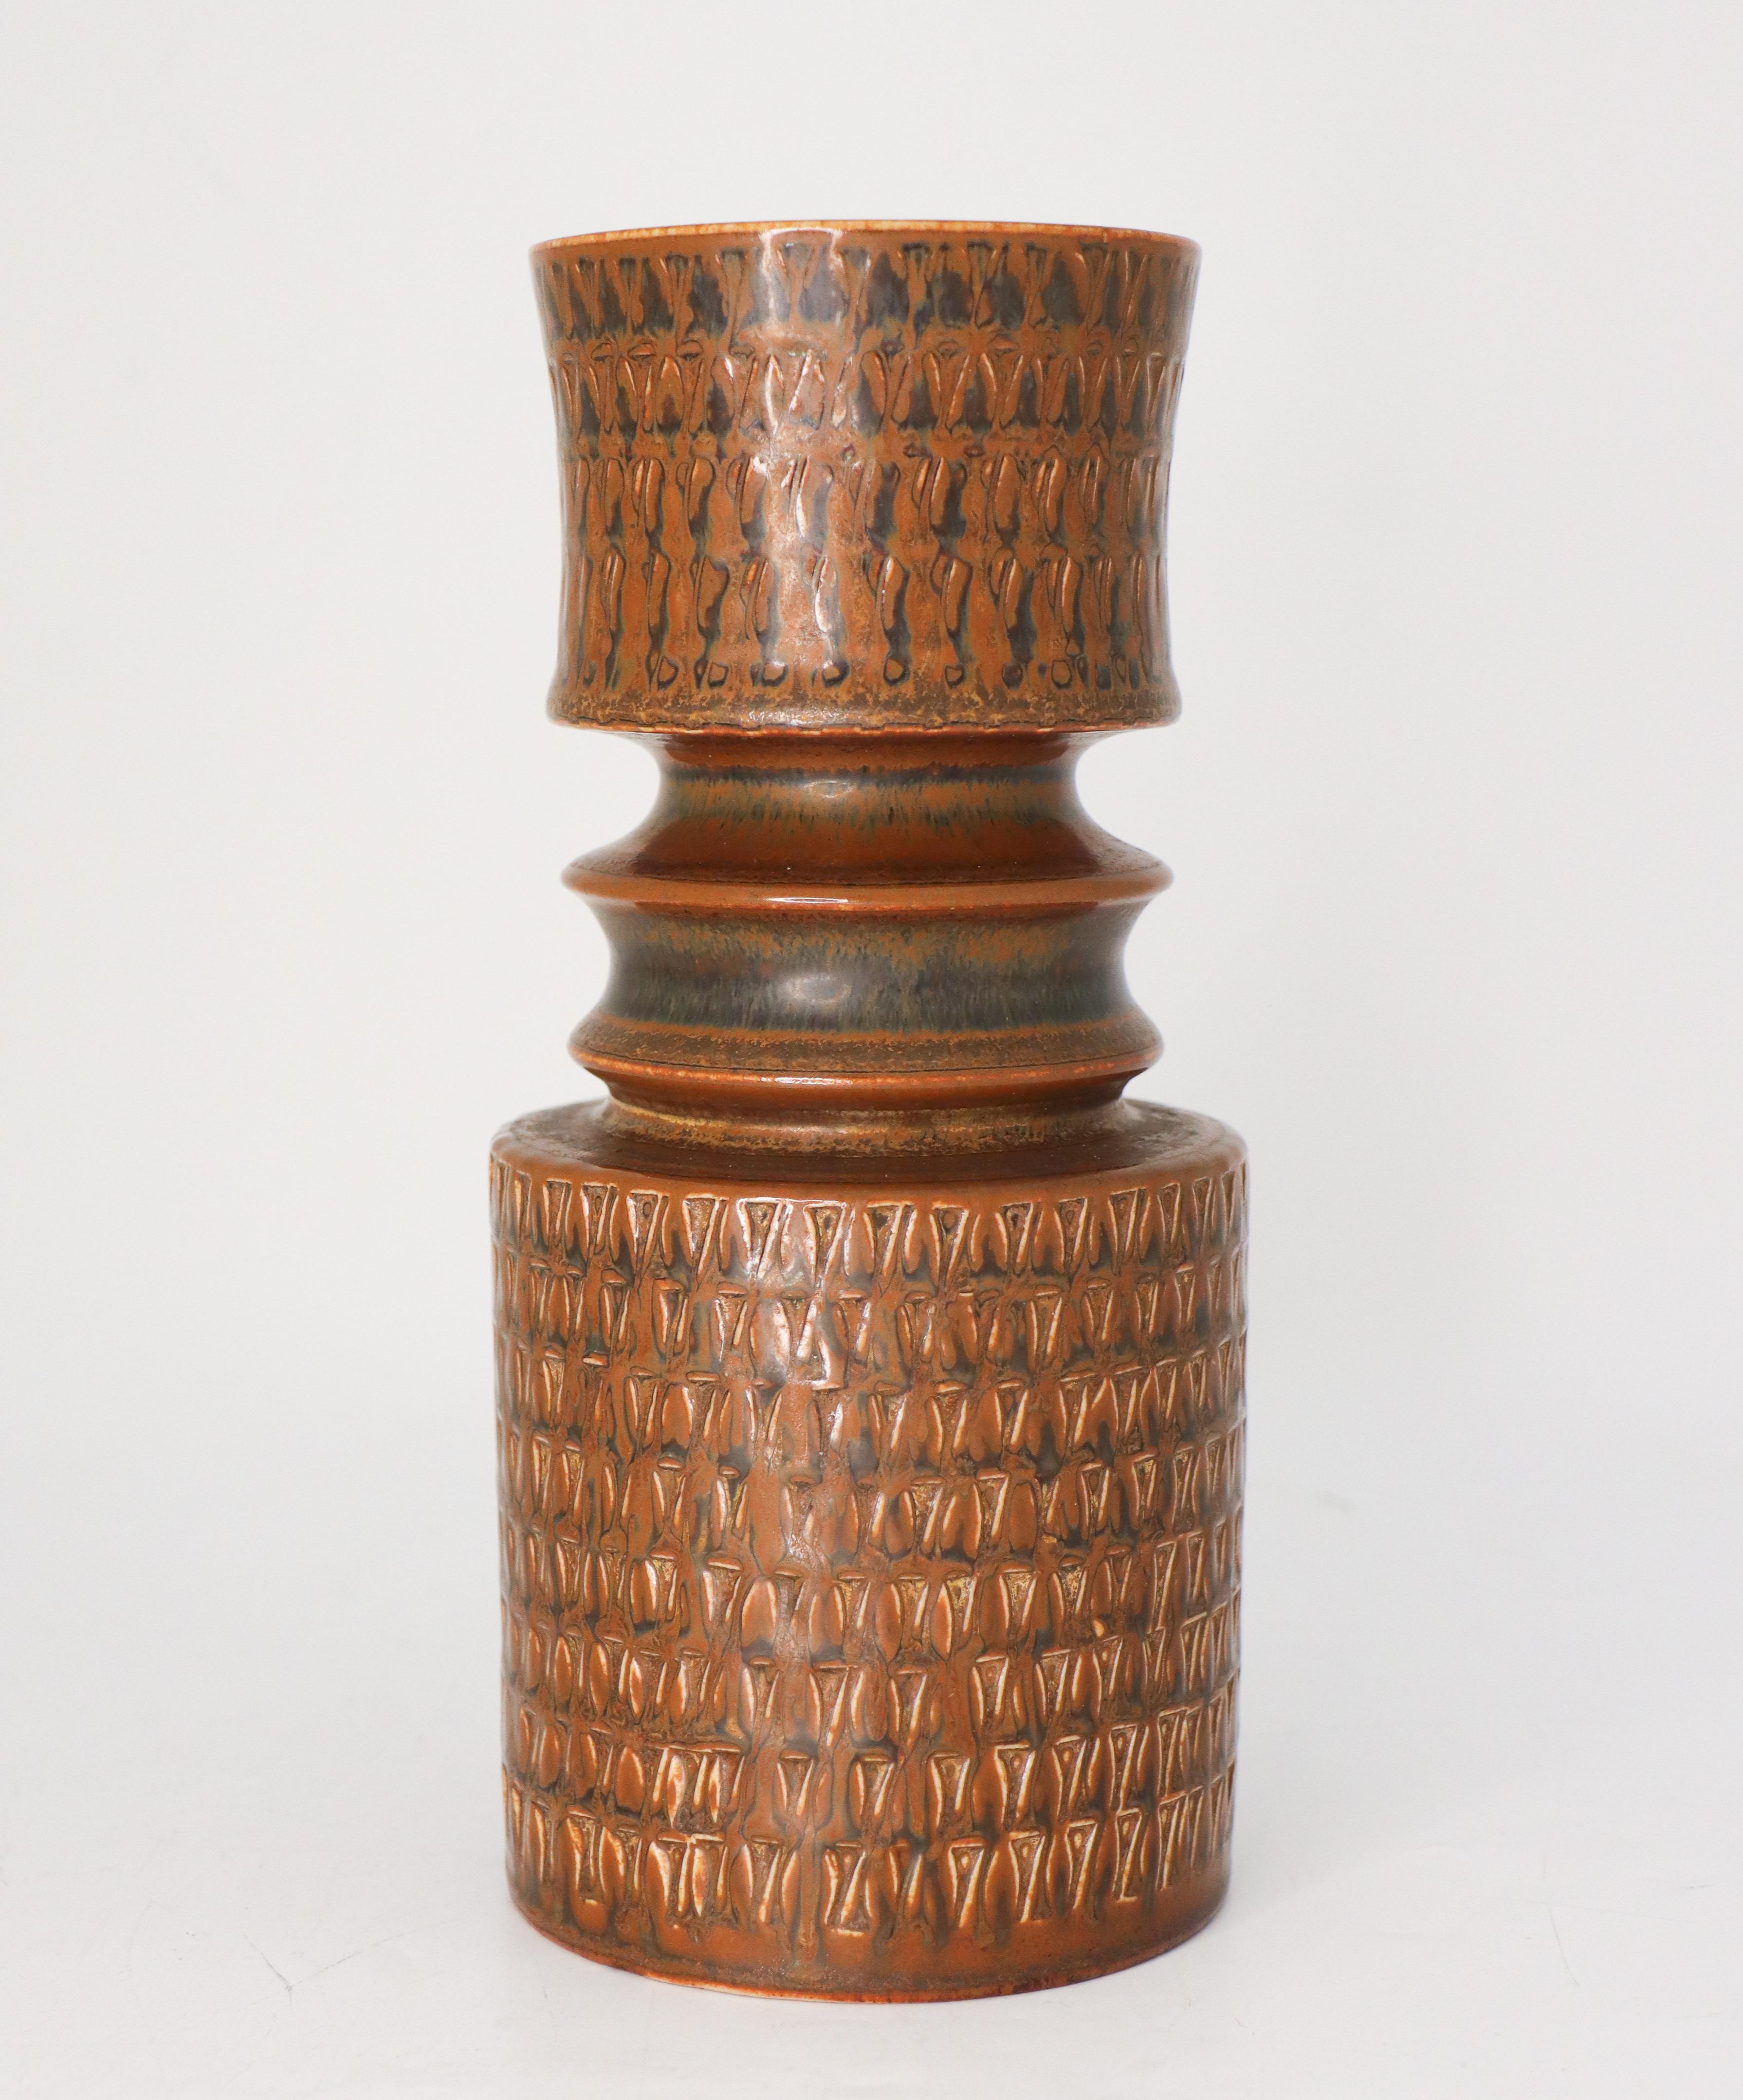 A large brown stoneware vase with a relief decor designed by Stig Lindberg at Gustavsberg. It is 21 cm high and in very good condition. This vase was designed in 1962.